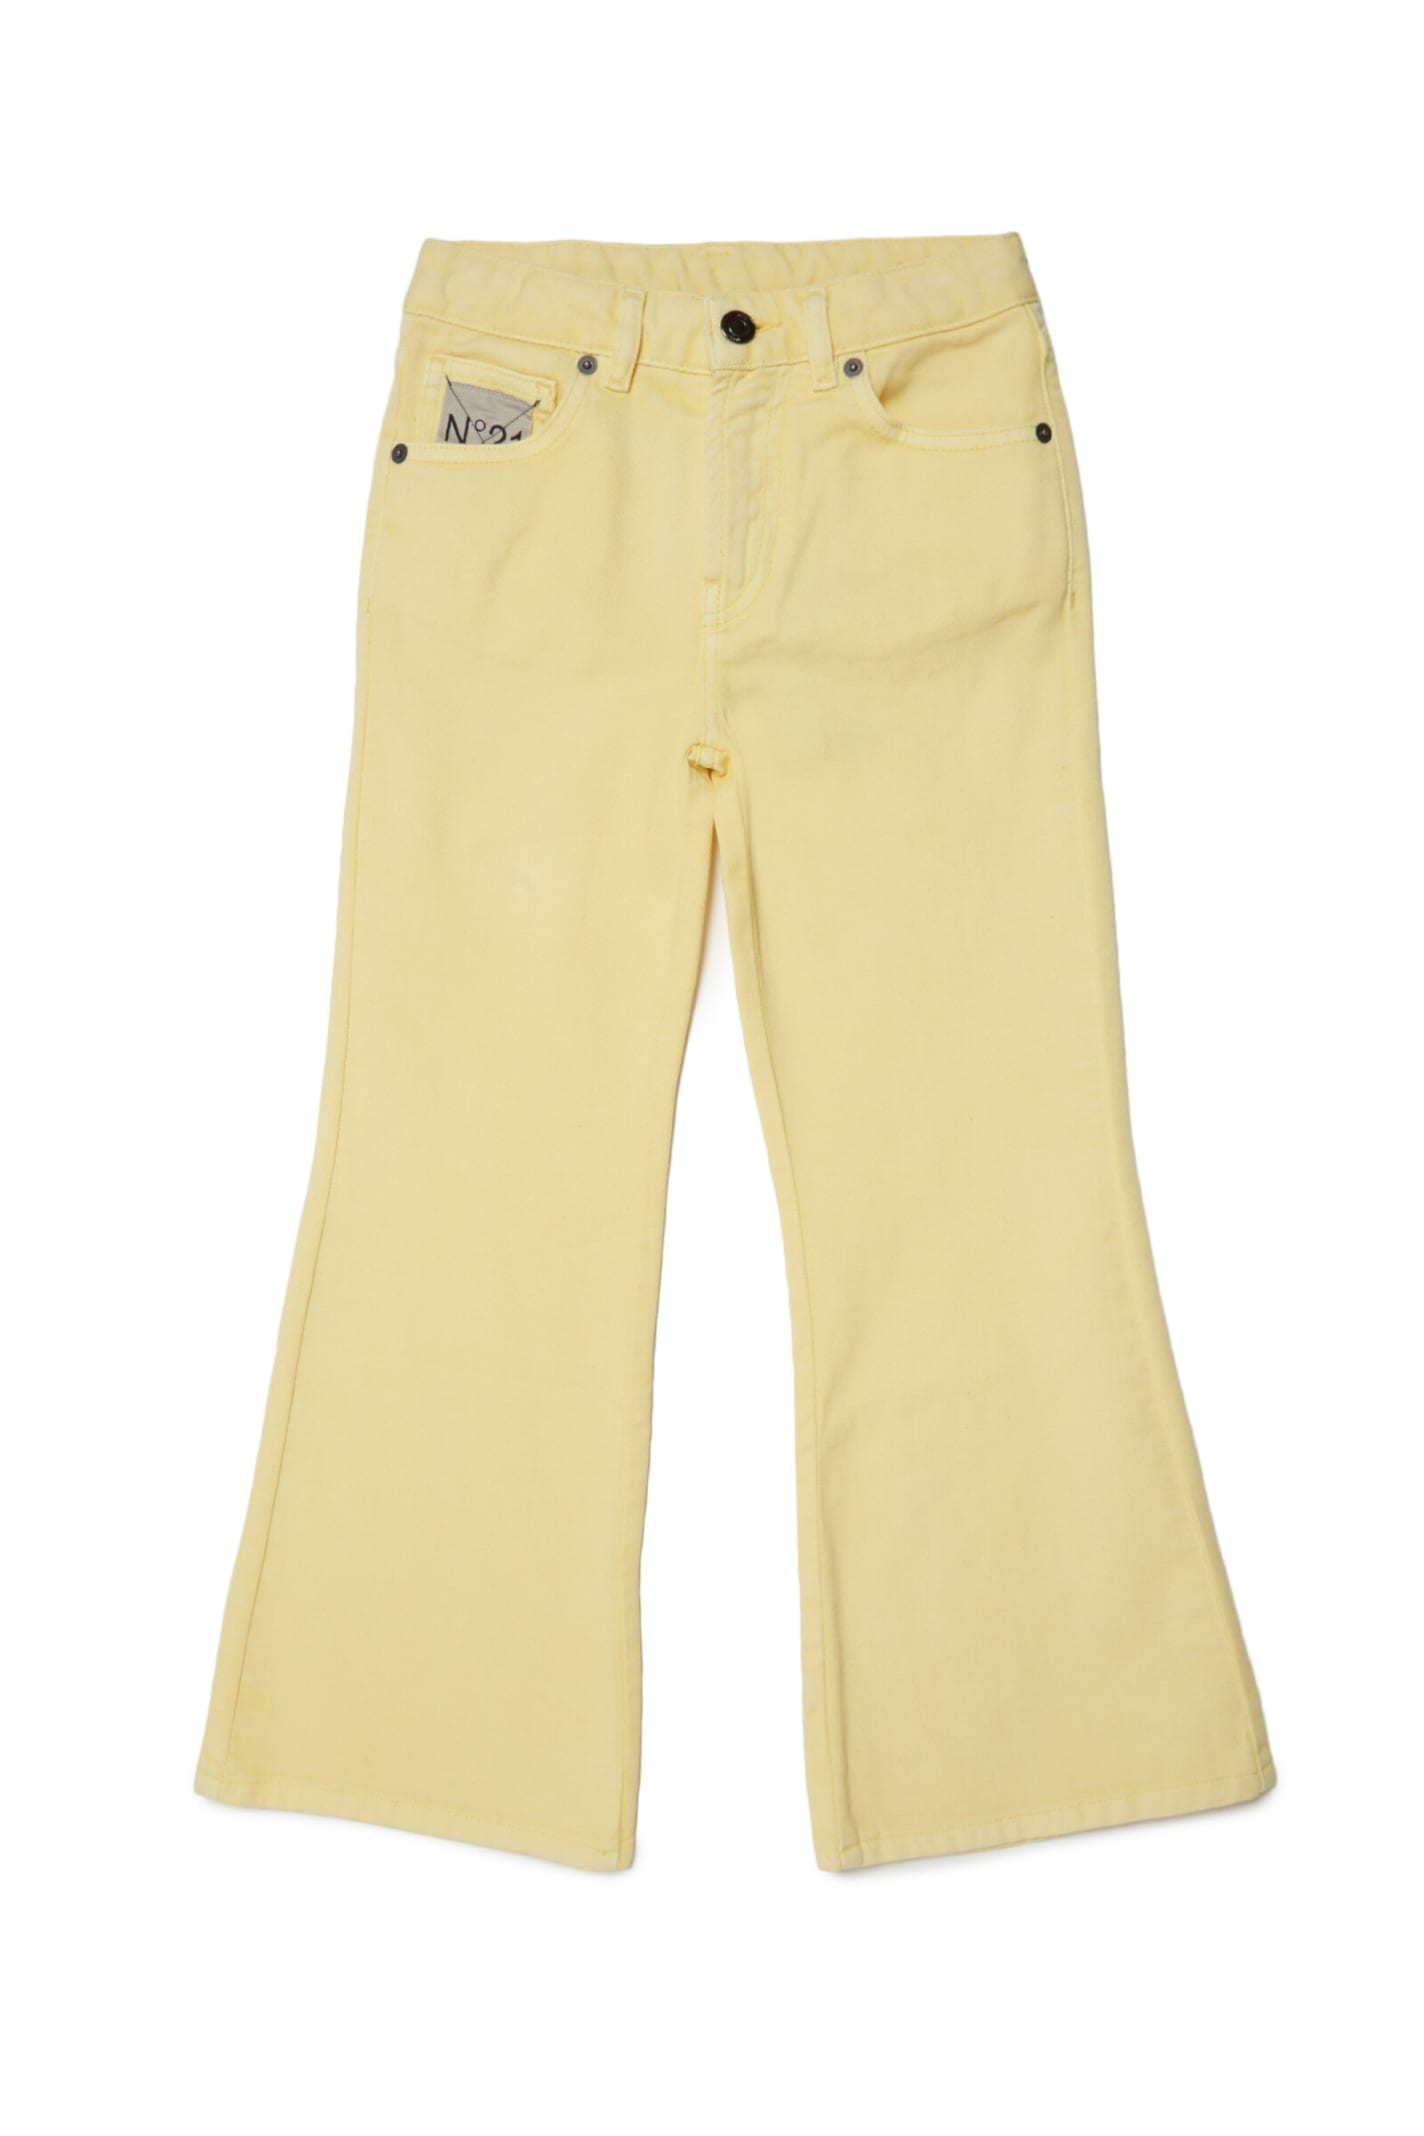 N°21 N21P162F TROUSERS N°21 YELLOW JEANS WITH VINTAGE EFFECT